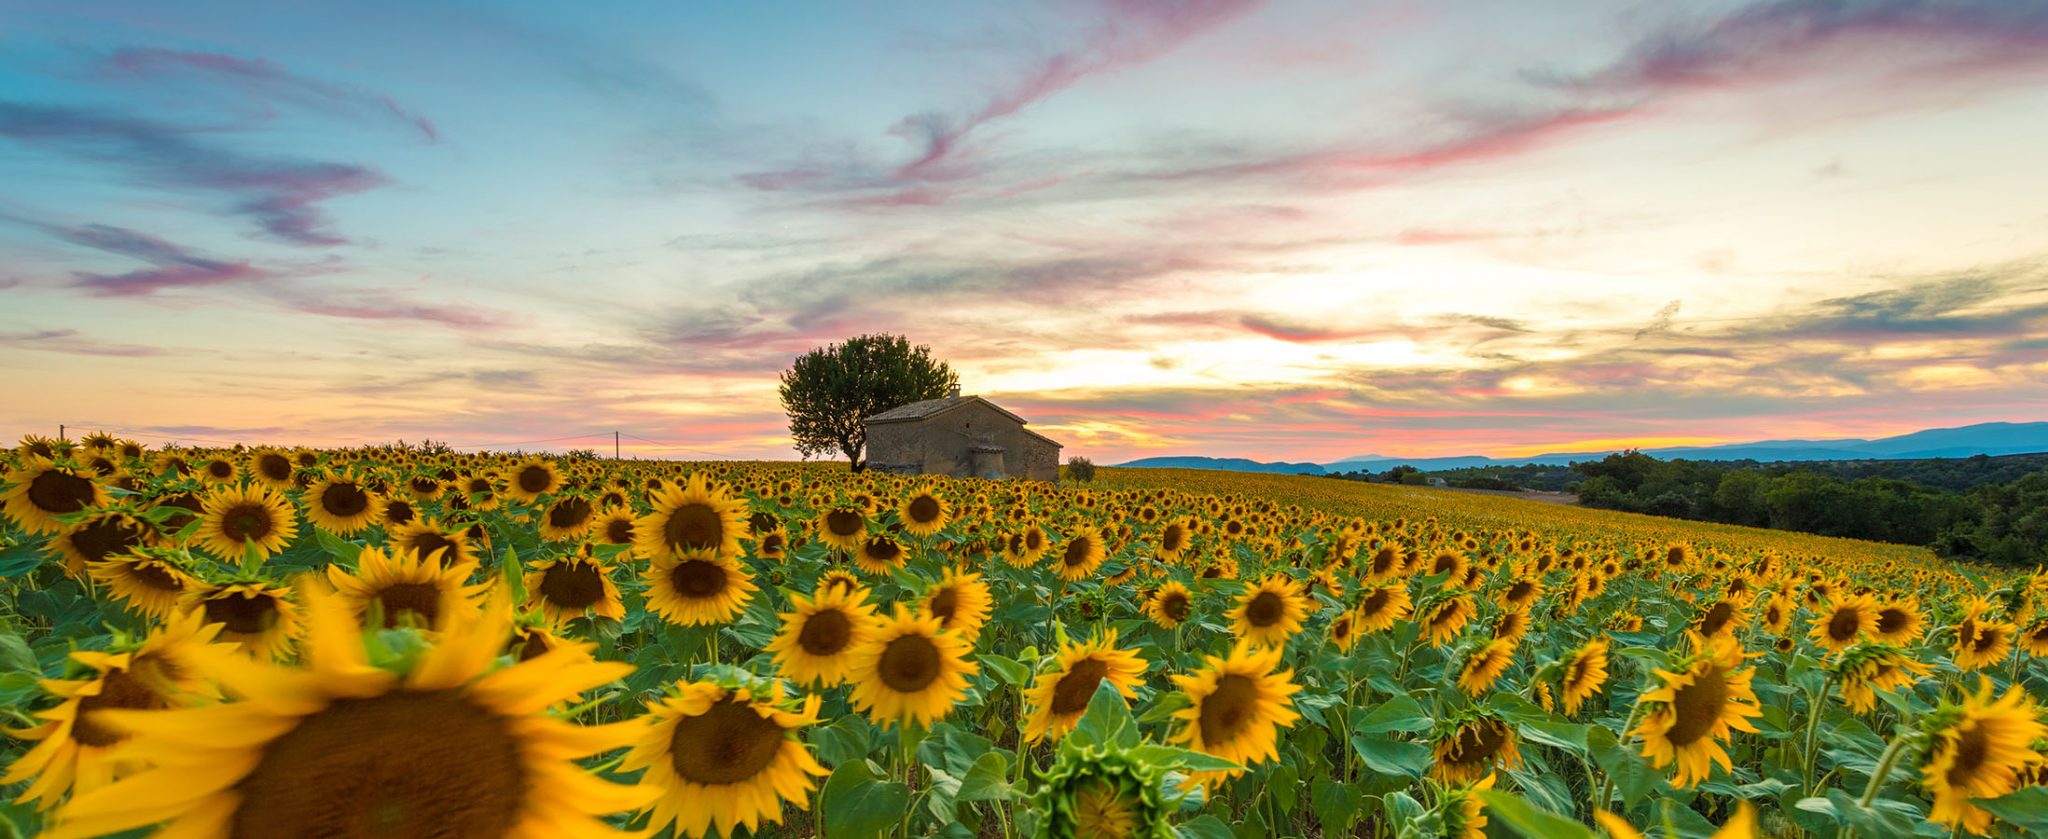 Sunflower field in Provence by FRANCE OFF THE BEATEN PATH™